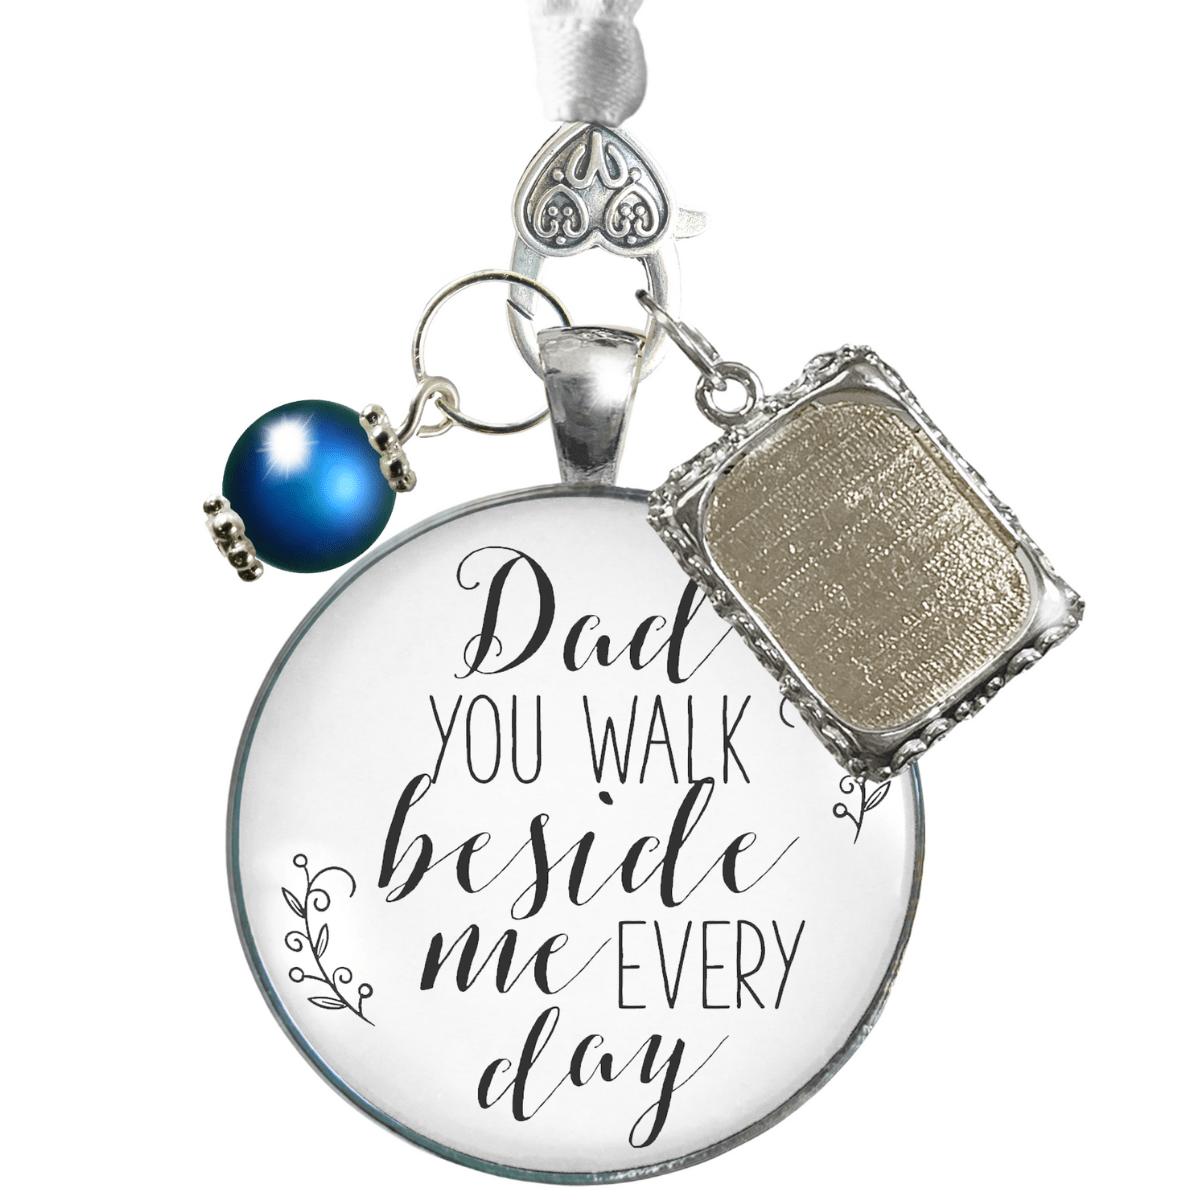 Wedding Bouquet Charm Dad You Walk Beside Me White Bride Father Photo Silver Blue Bead - Gutsy Goodness;Wedding Bouquet Charm Dad You Walk Beside Me White Bride Father Photo Silver Blue Bead - Gutsy Goodness Handmade Jewelry Gifts